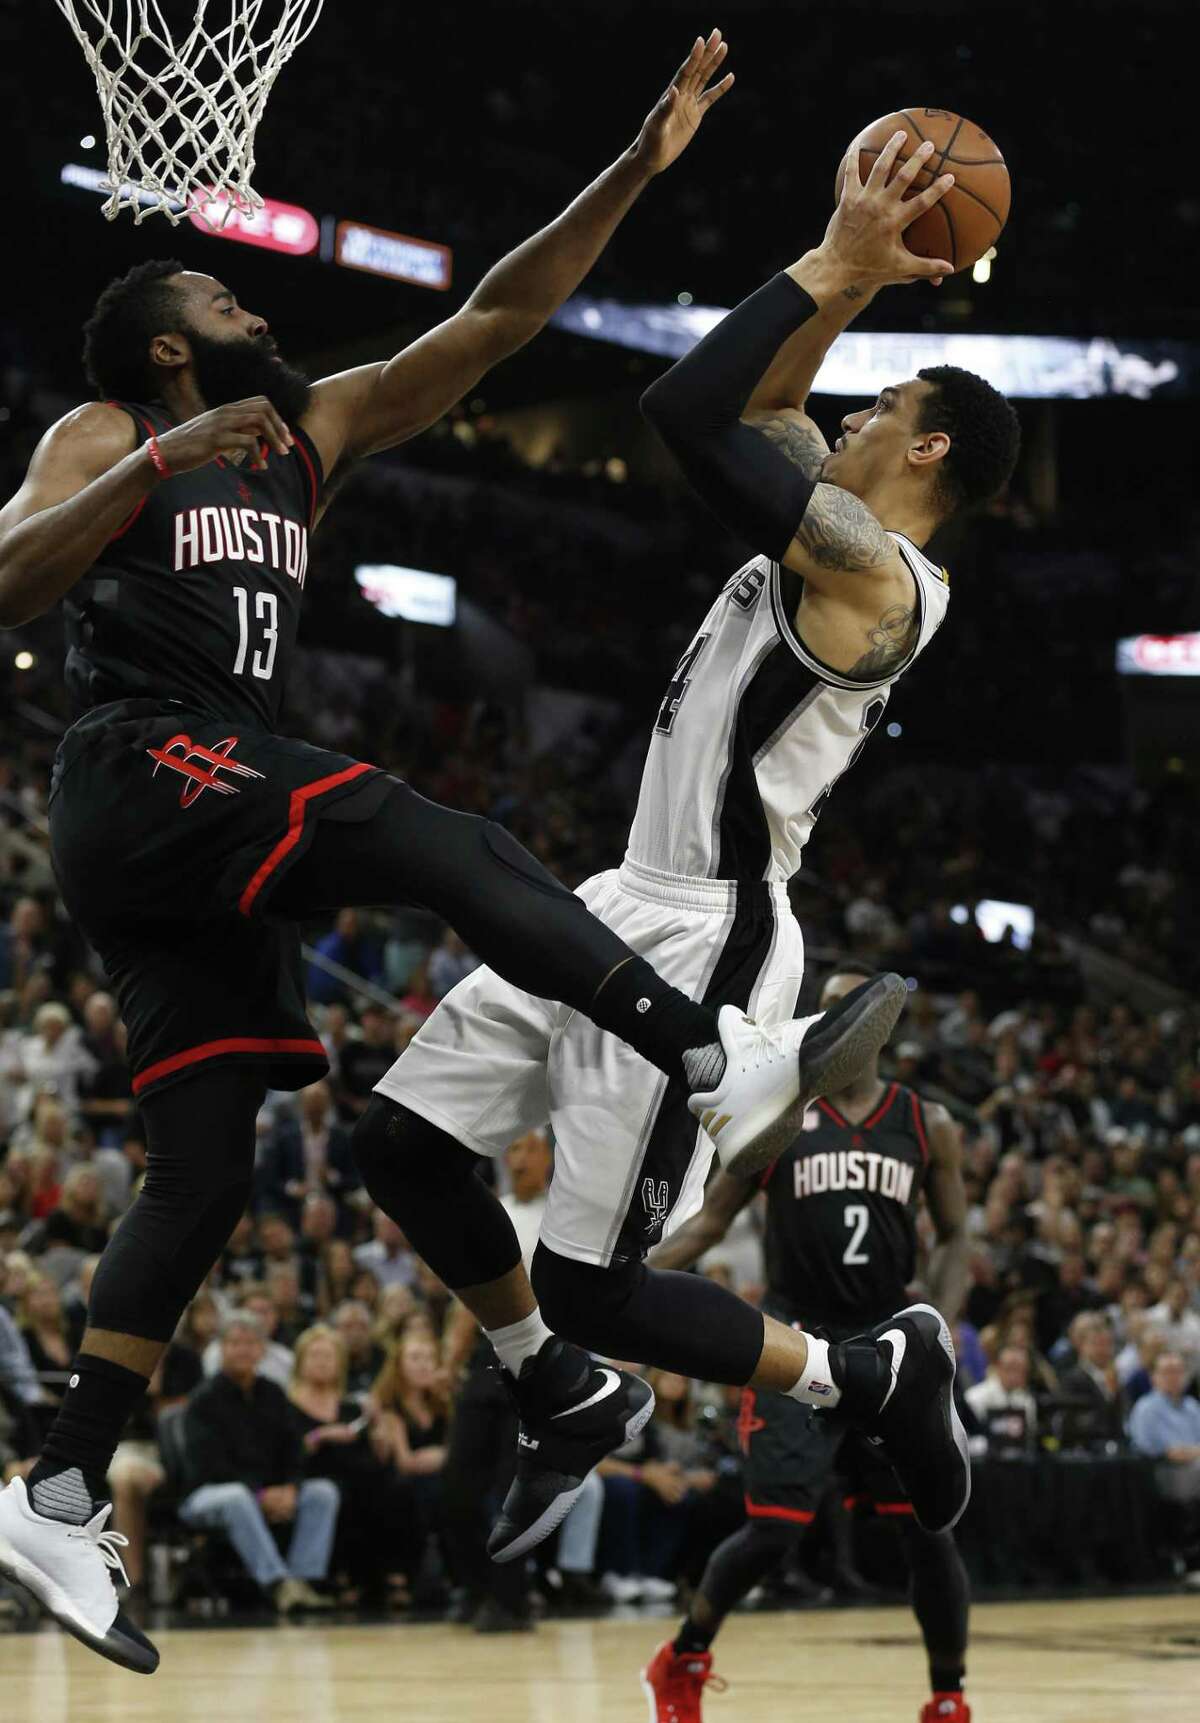 Spurs’ Danny Green attempts a shot against the Rockets’ James Harden in Game 5 at the AT&T Center on May 9, 2017.